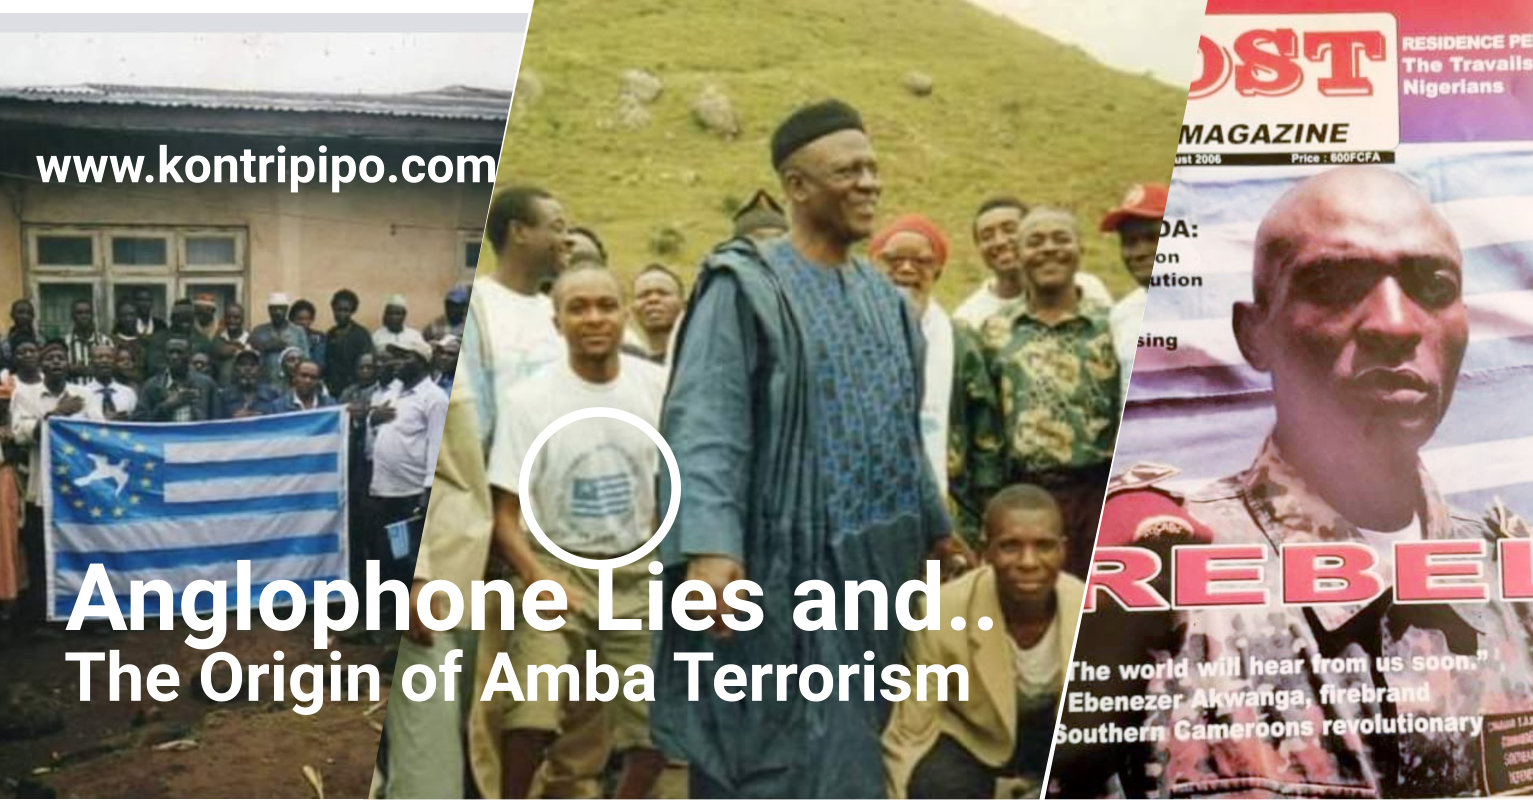 Anglophone Lies and the True Origin of Ambazonia terrorism in Cameroon